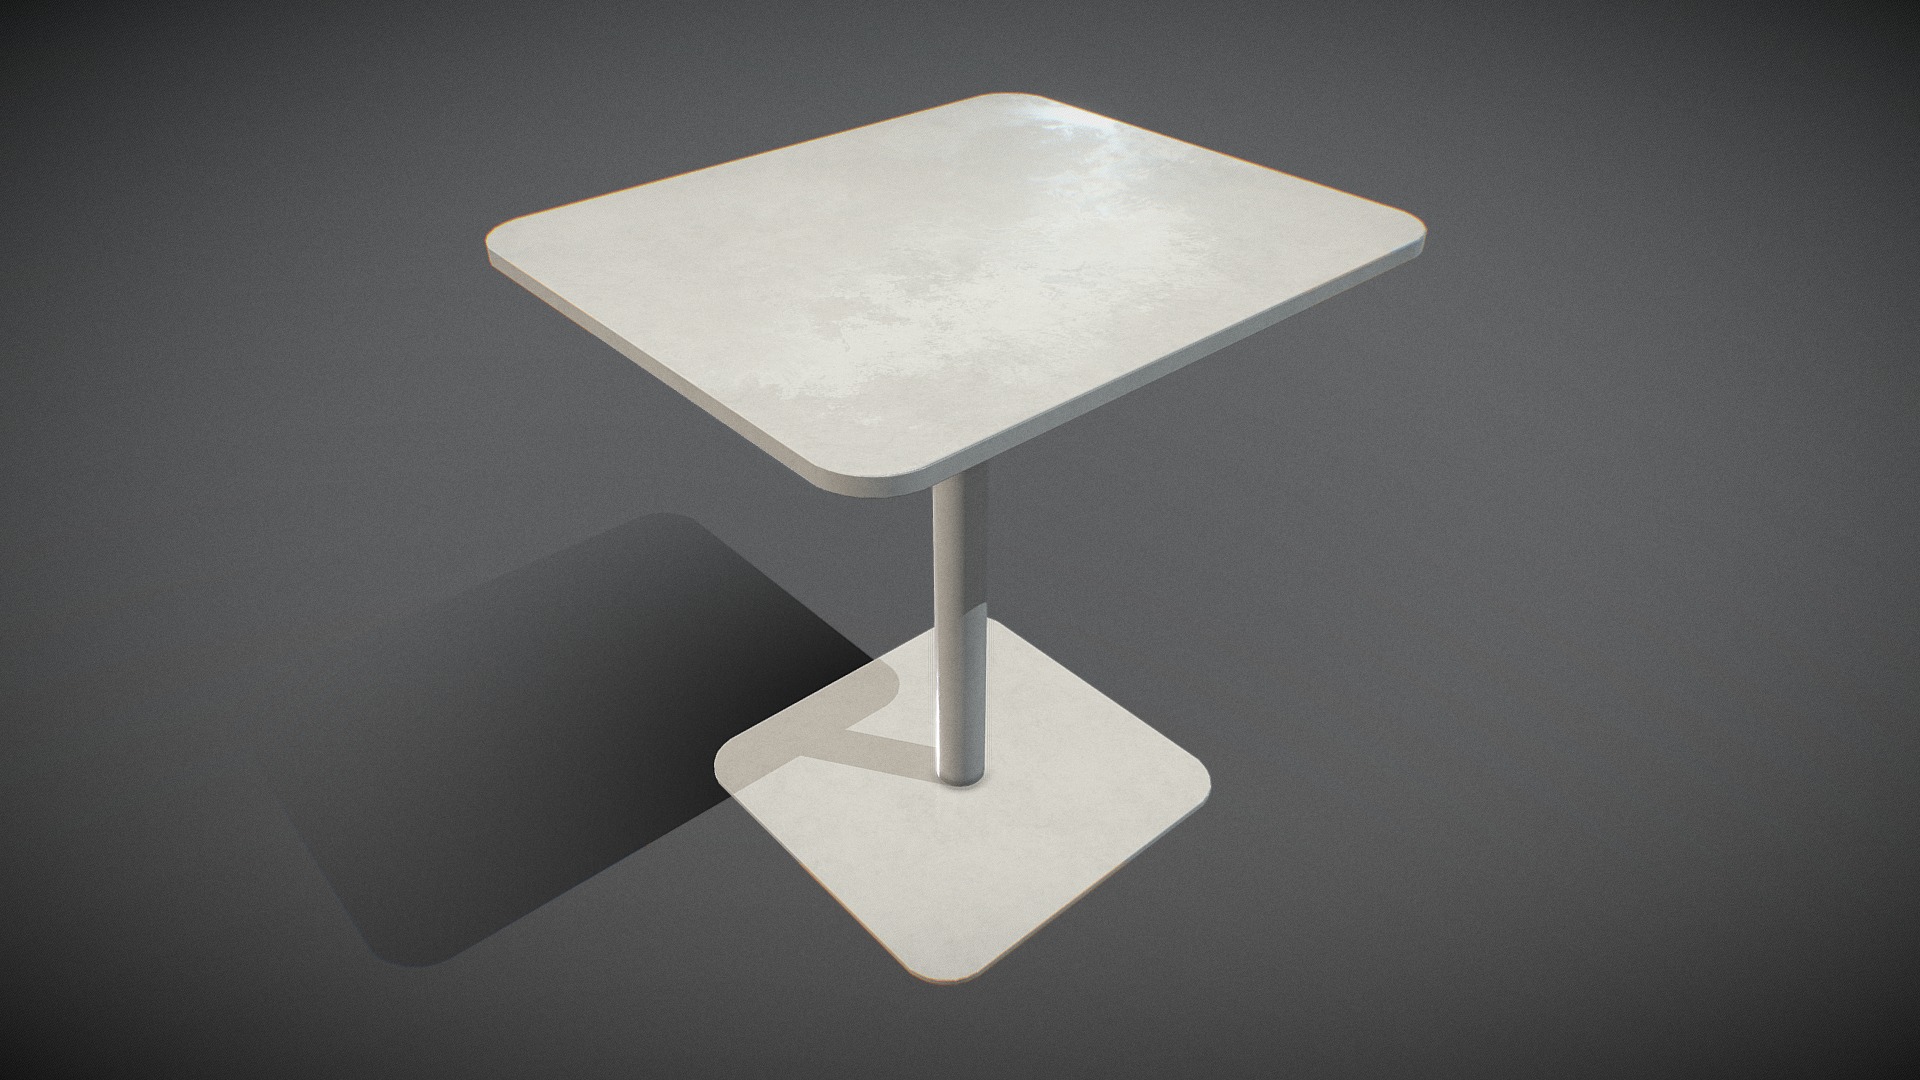 3D model Mesa Cafe Table-Model 4671 v-02 - This is a 3D model of the Mesa Cafe Table-Model 4671 v-02. The 3D model is about a white table with a white top.